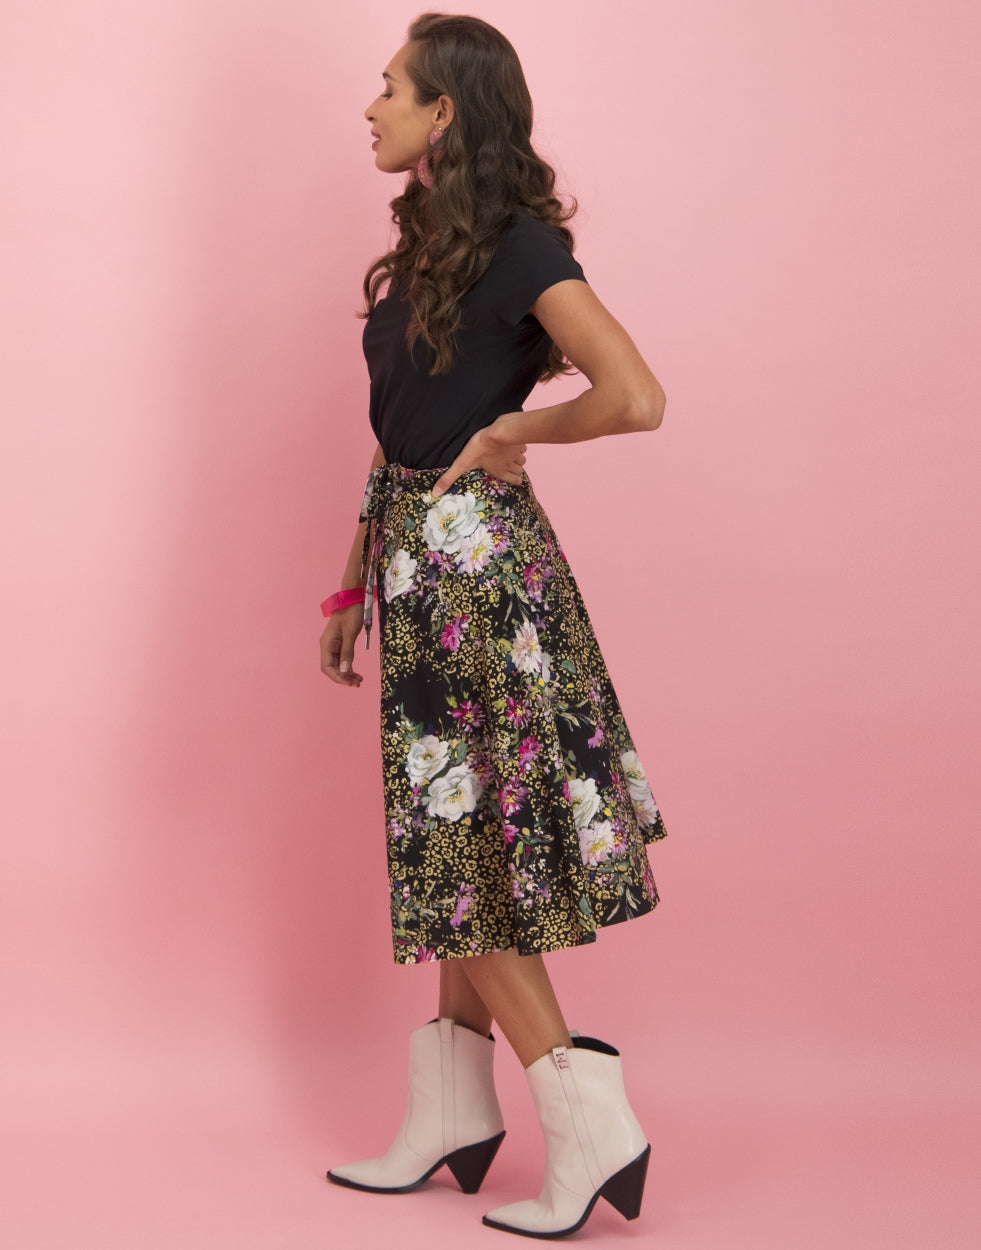 Maddy Skirt Leopard and Rose | Black